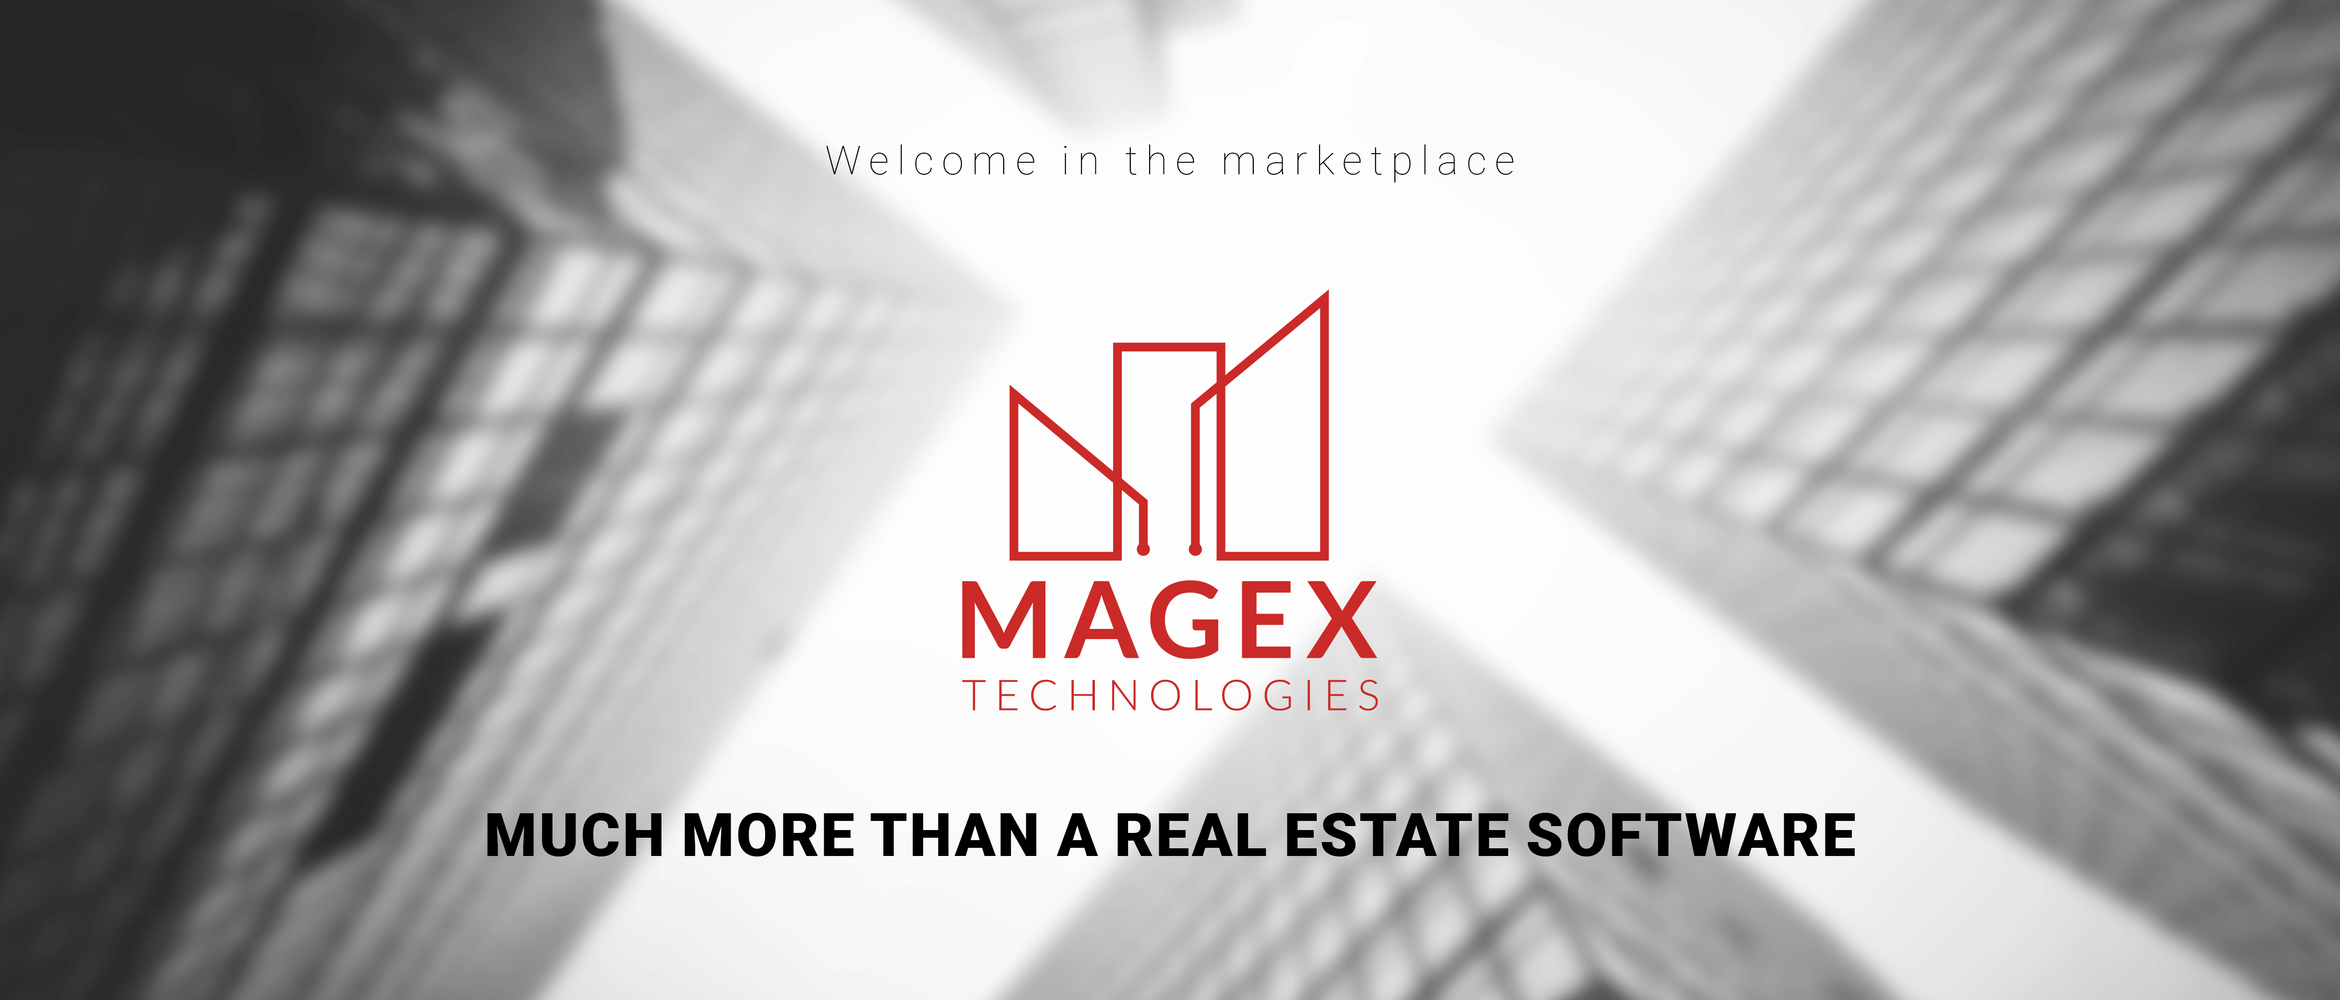 Welcome to MAGEX Marketplace